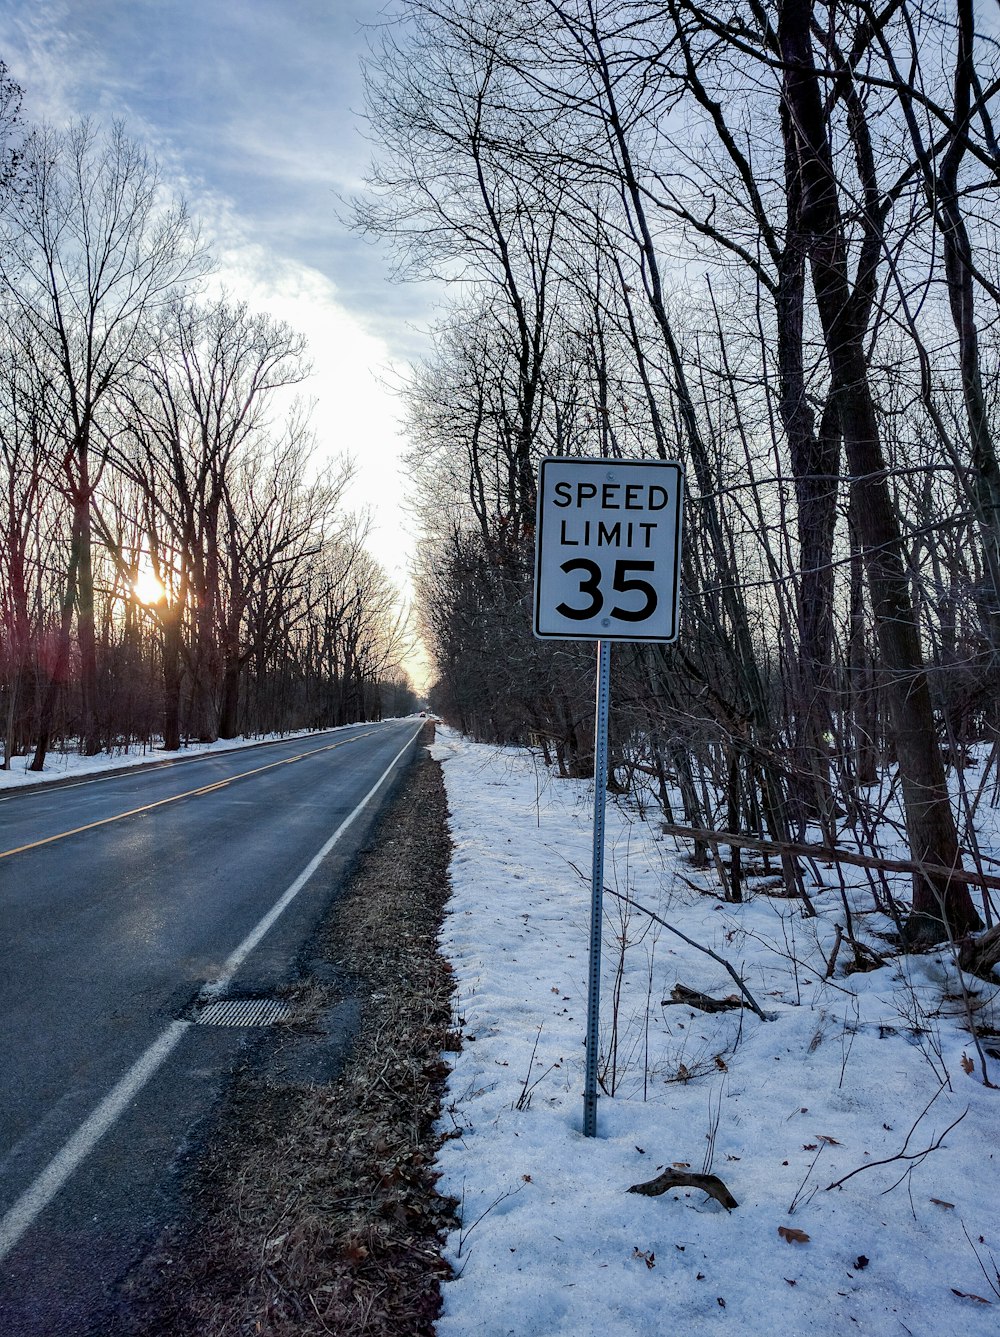 road beside speed limit 35 signboard near bare trees during winter